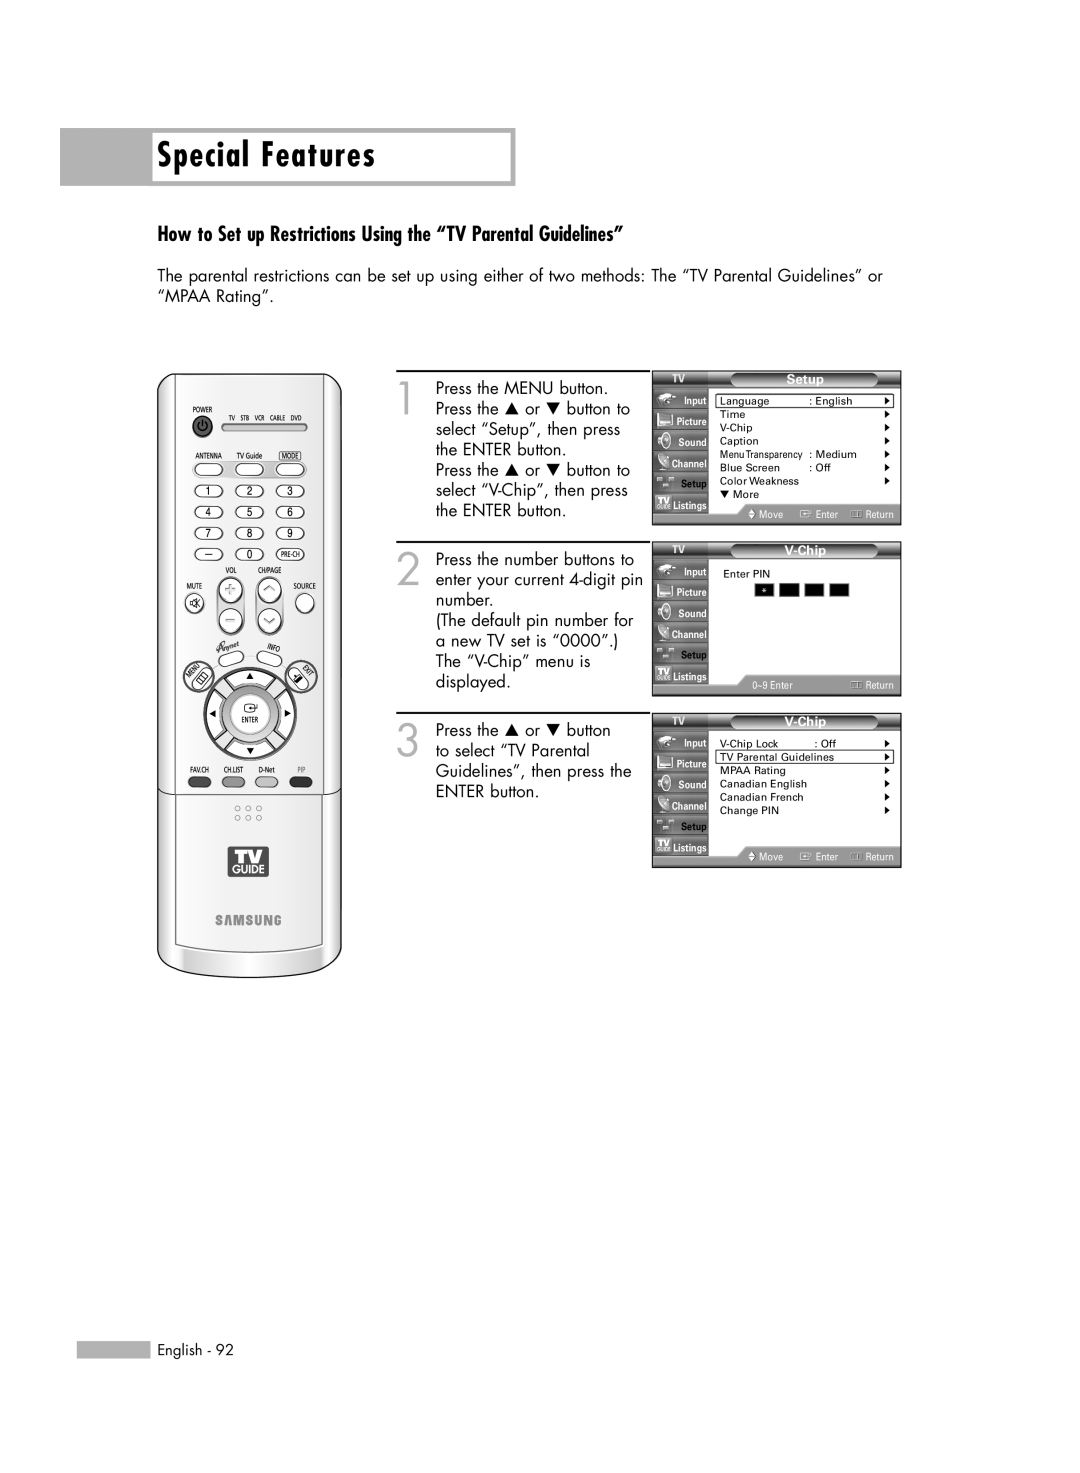 Samsung HL-R5688W manual How to Set up Restrictions Using the “TV Parental Guidelines”, Special Features 